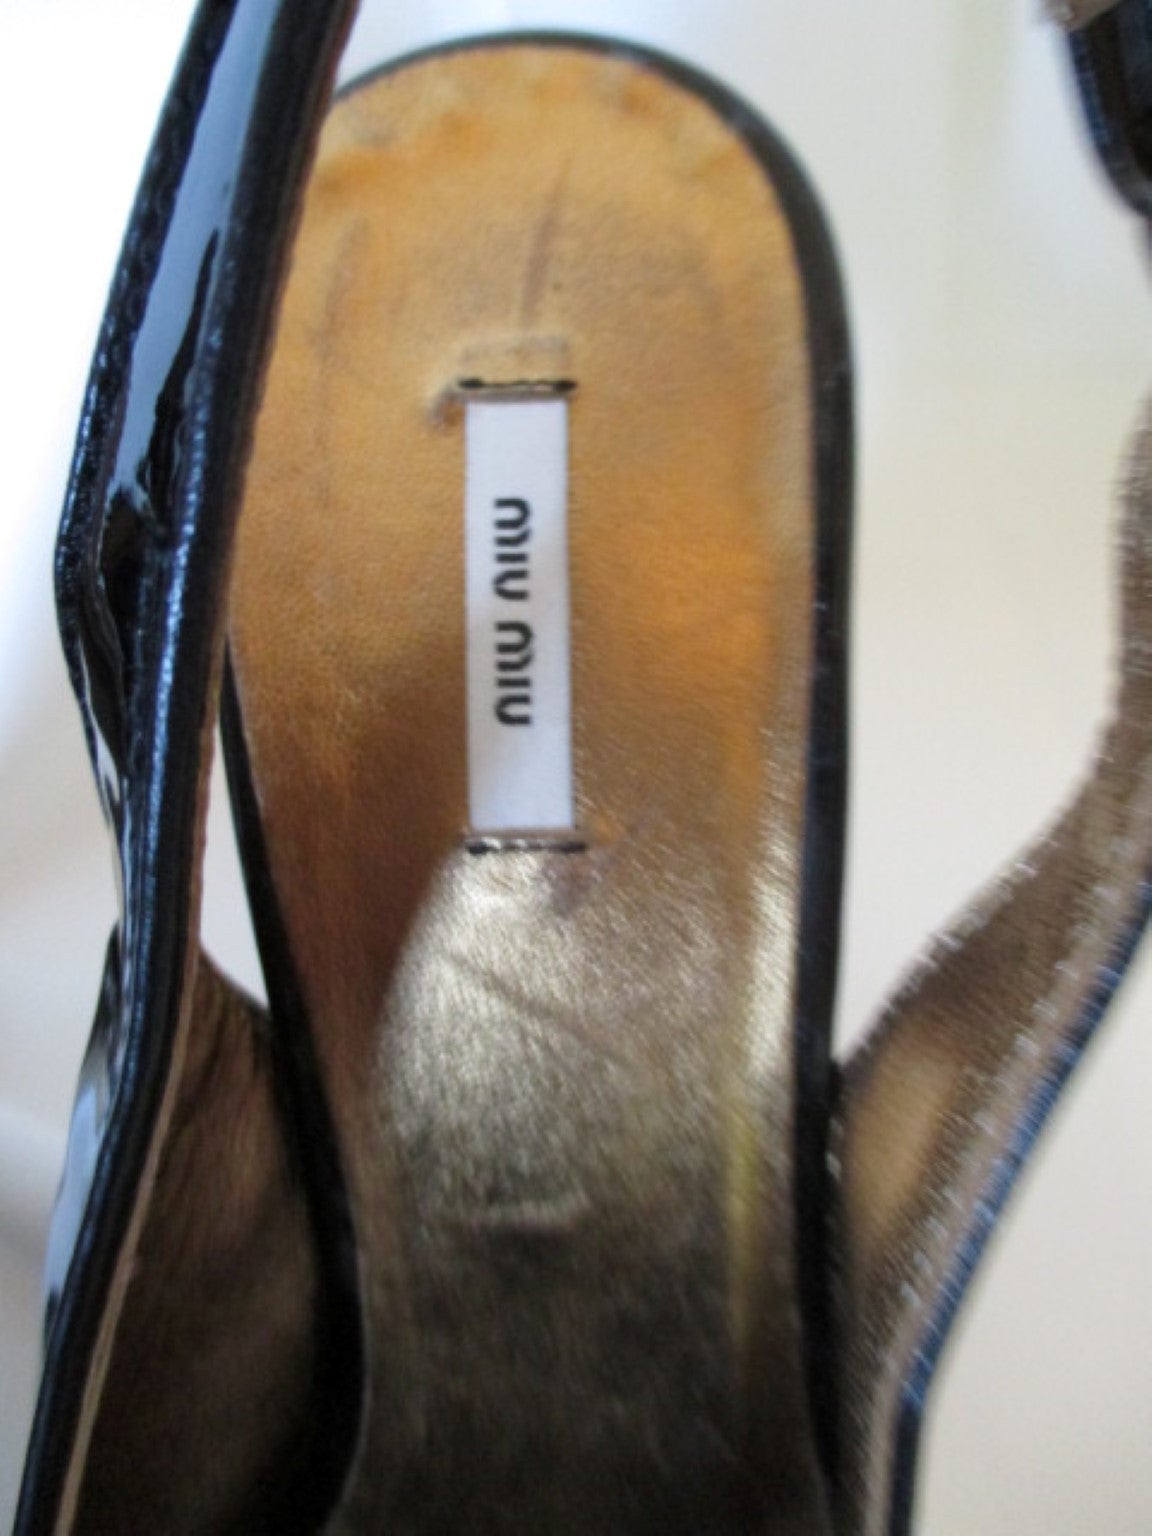 Miu Miu black patent leather high heels shoes.
Size heels 12 cm
Rubber soles
Please note that vintage items are not new and therefore might have minor imperfections.